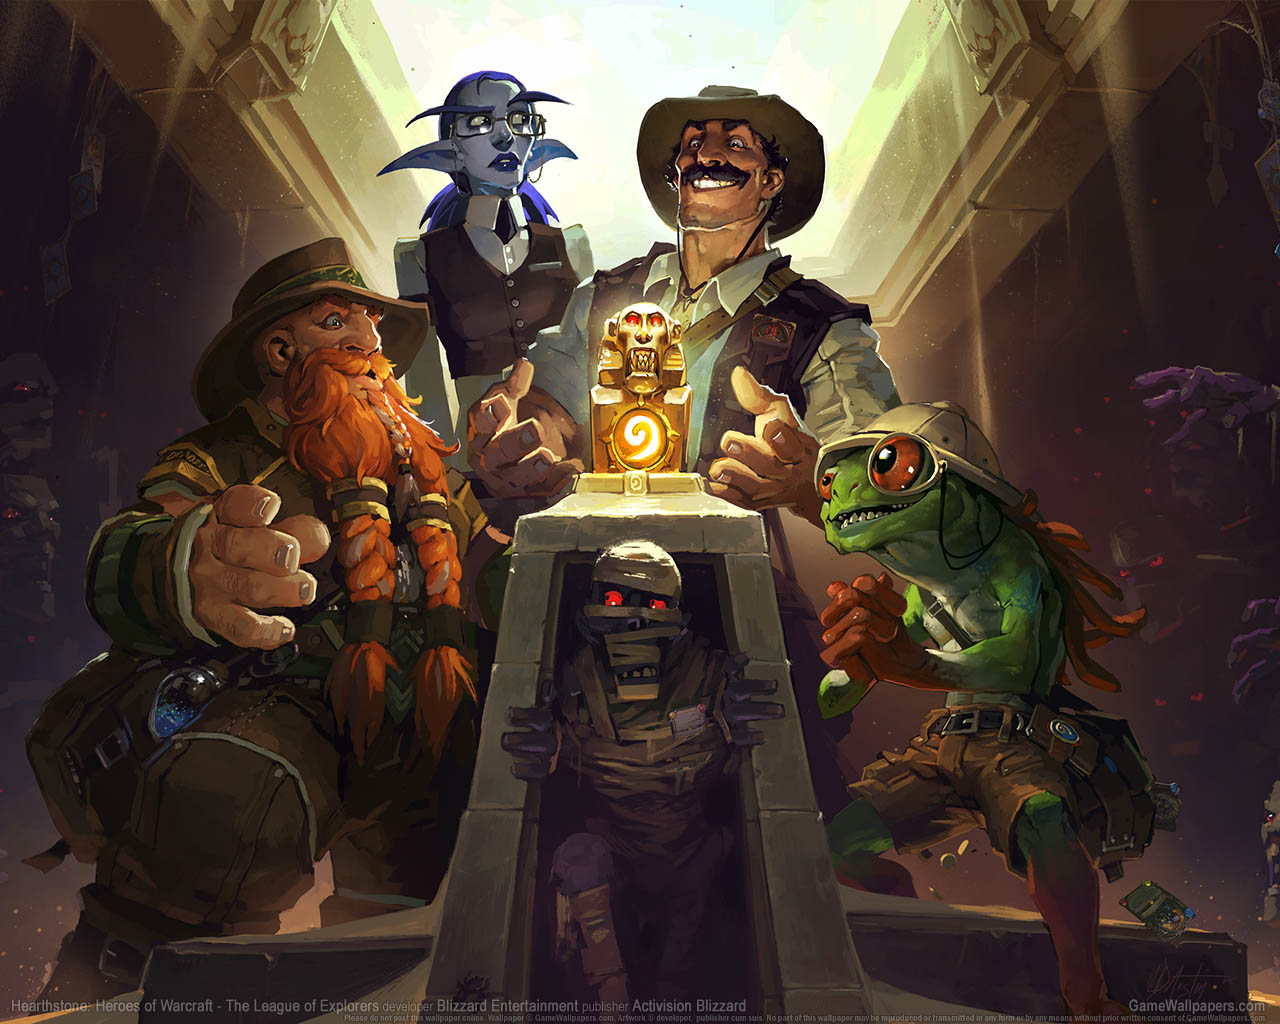 Hearthstone%25253A Heroes of Warcraft - The League of Explorers fond d'cran 01 1280x1024